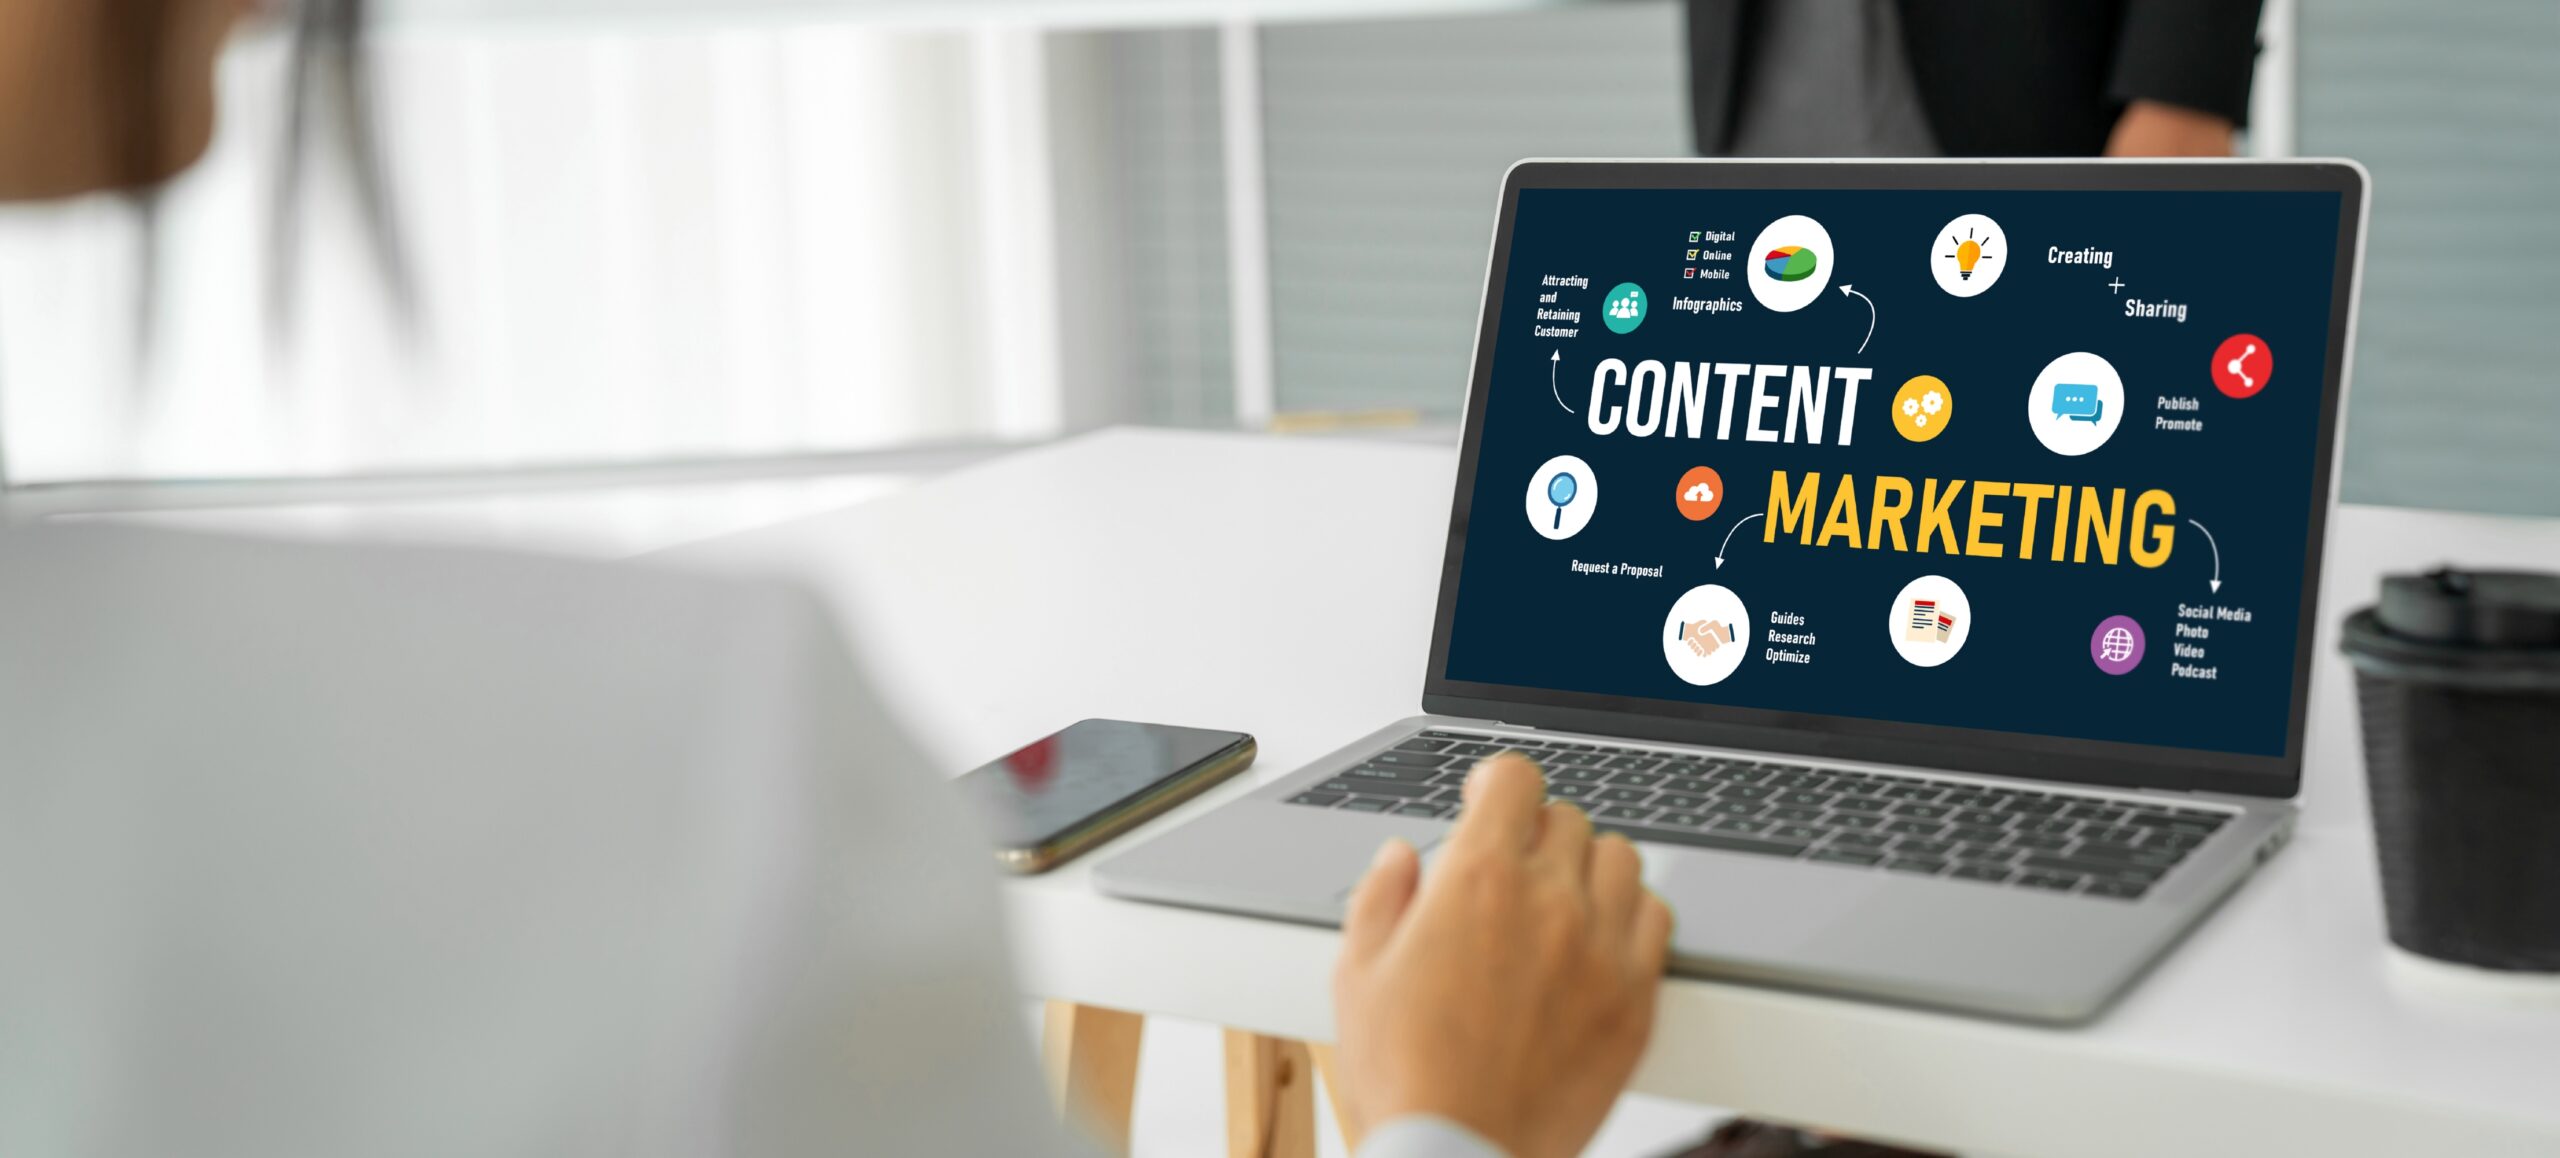 Is Content Marketing Crucial for eCommerce, or Oversaturated?